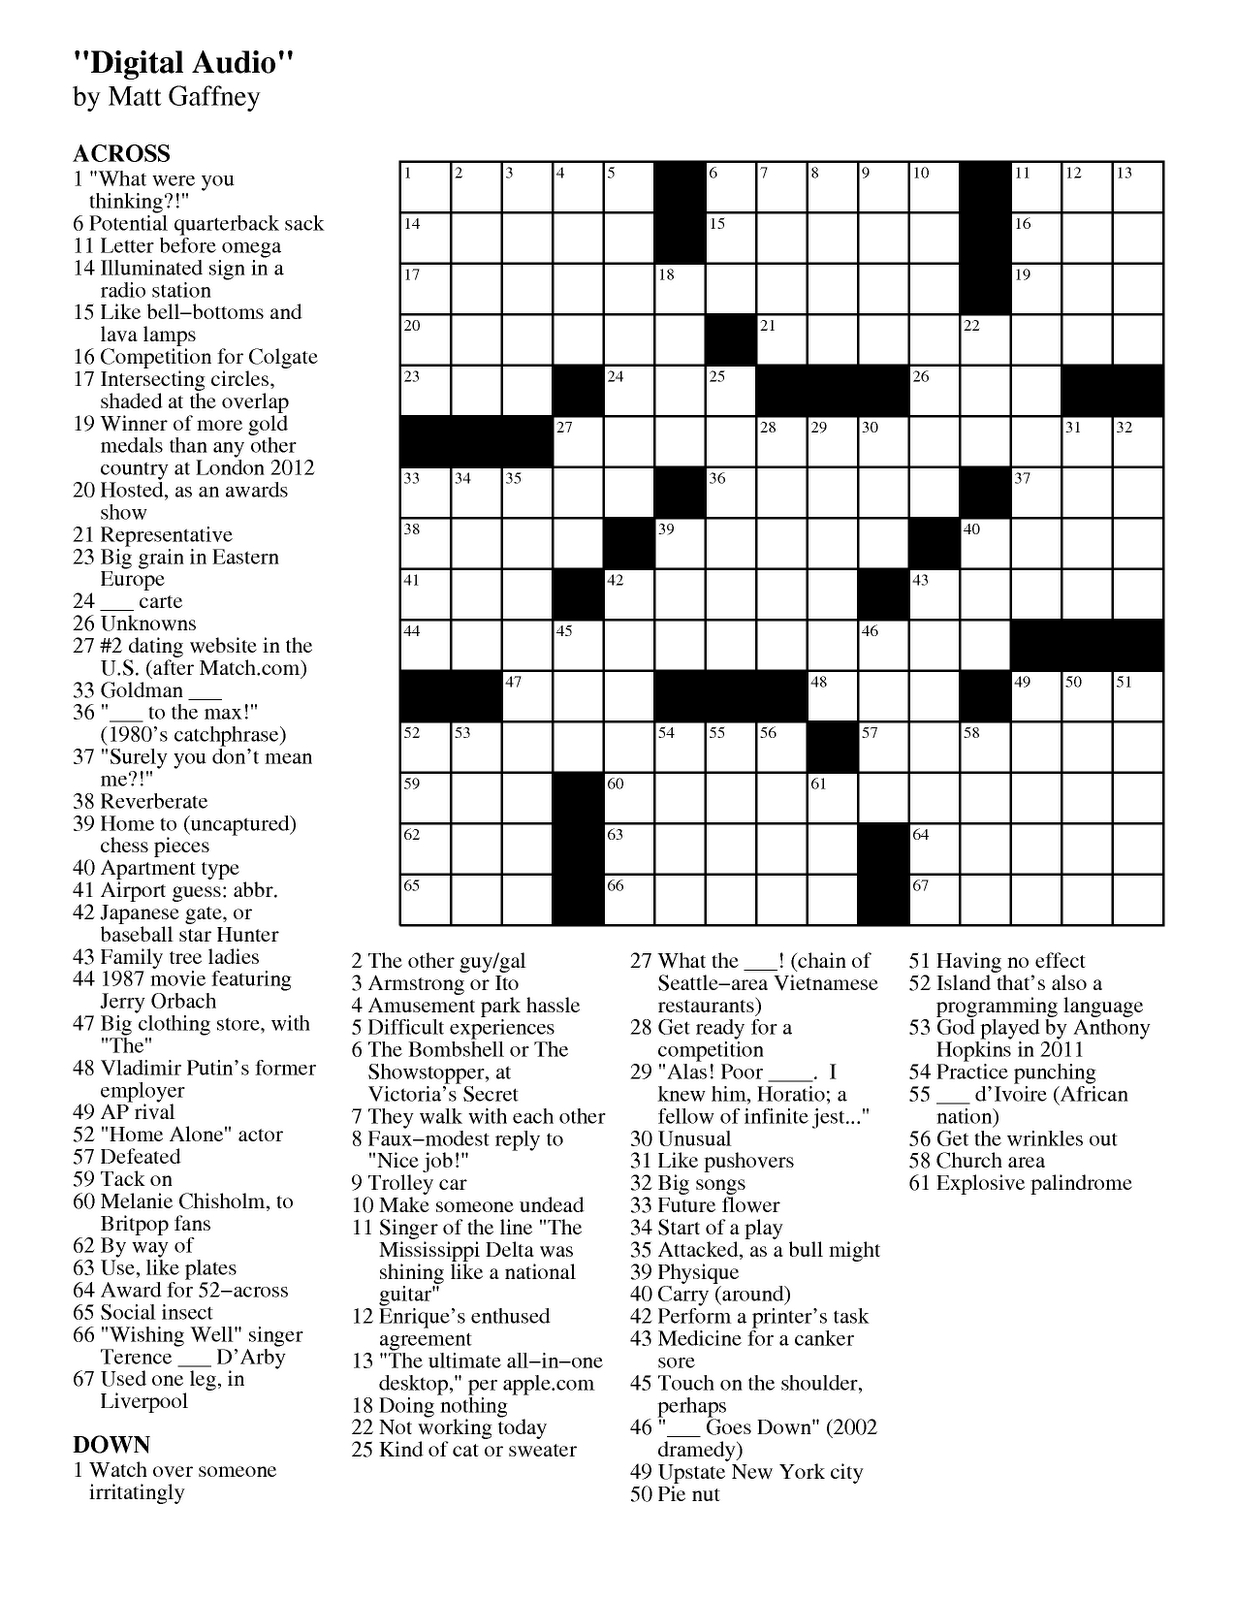 Crossword Puzzles Printable - Yahoo Image Search Results | Crossword - Guardian Printable Quick Crossword